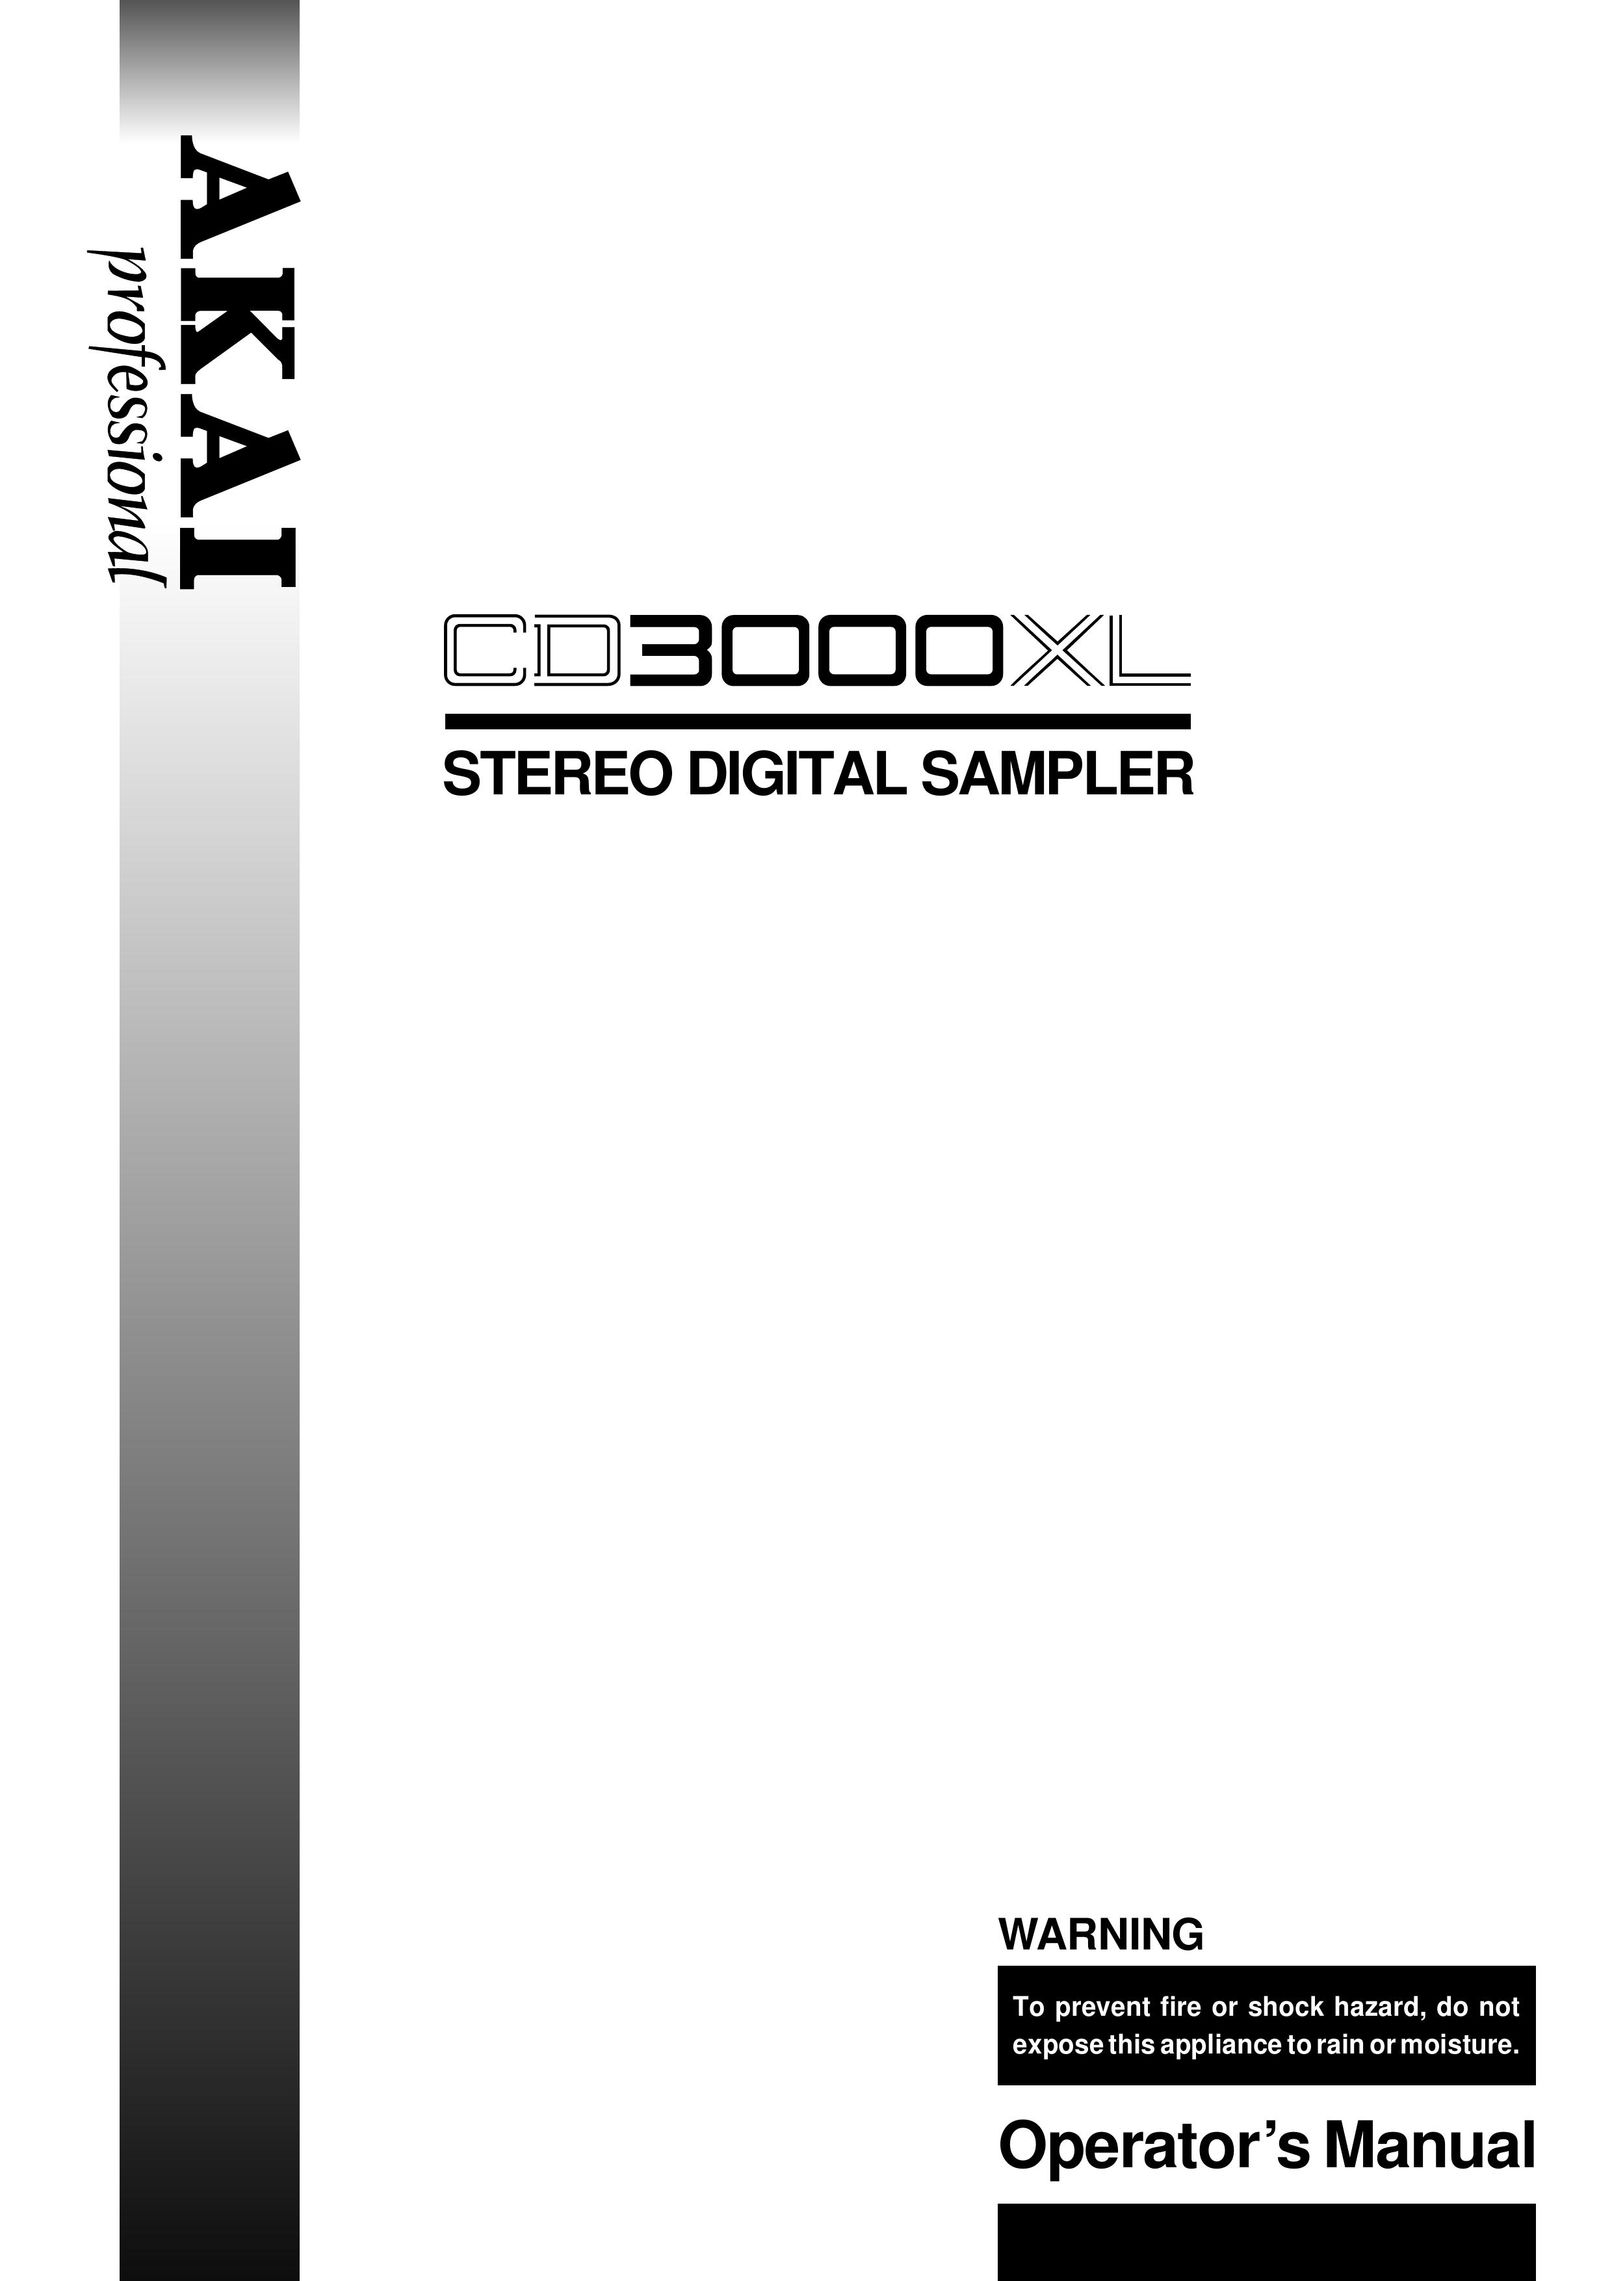 Akai CD3000XL Stereo Receiver User Manual (Page 1)